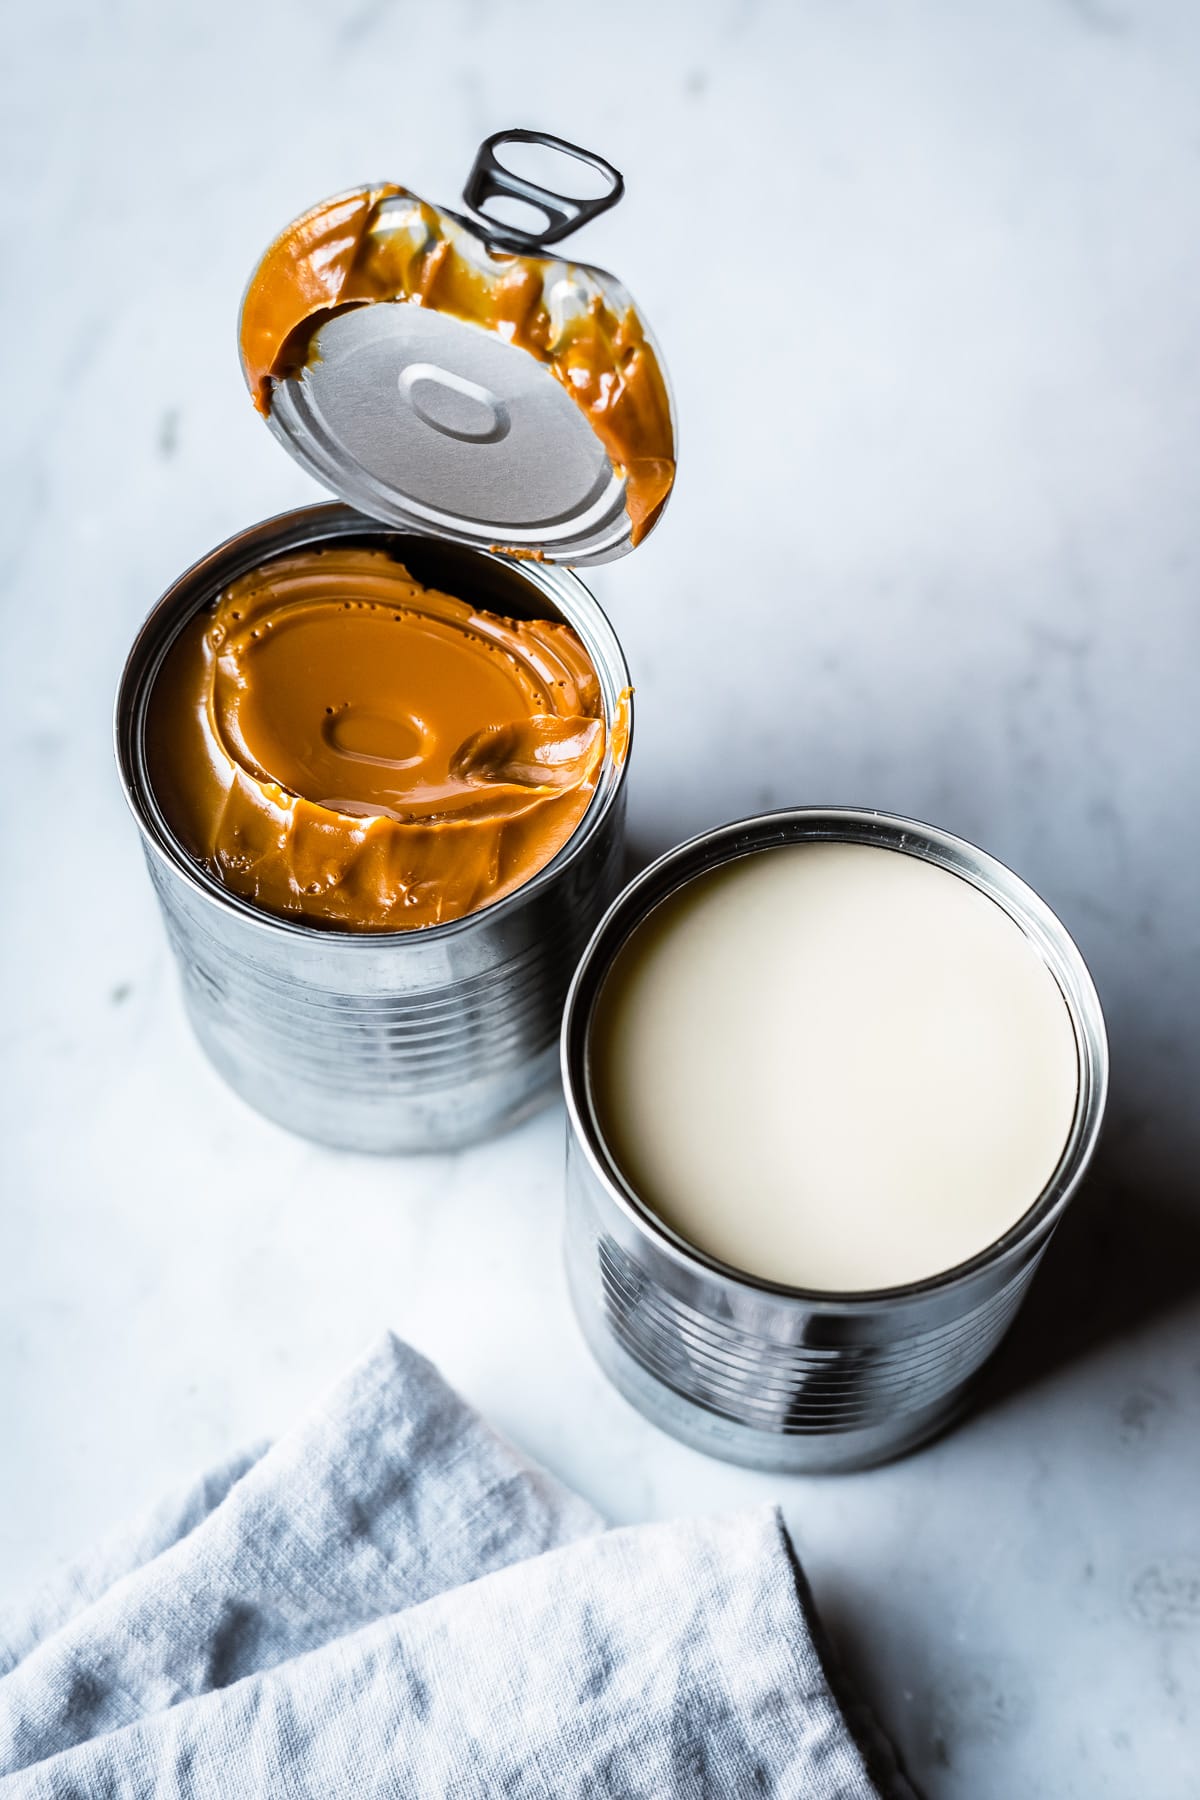 Two open cans, one of condensed milk, the other of dulce de leche, sit on a grey marble surface with a light blue linen napkin nearby.